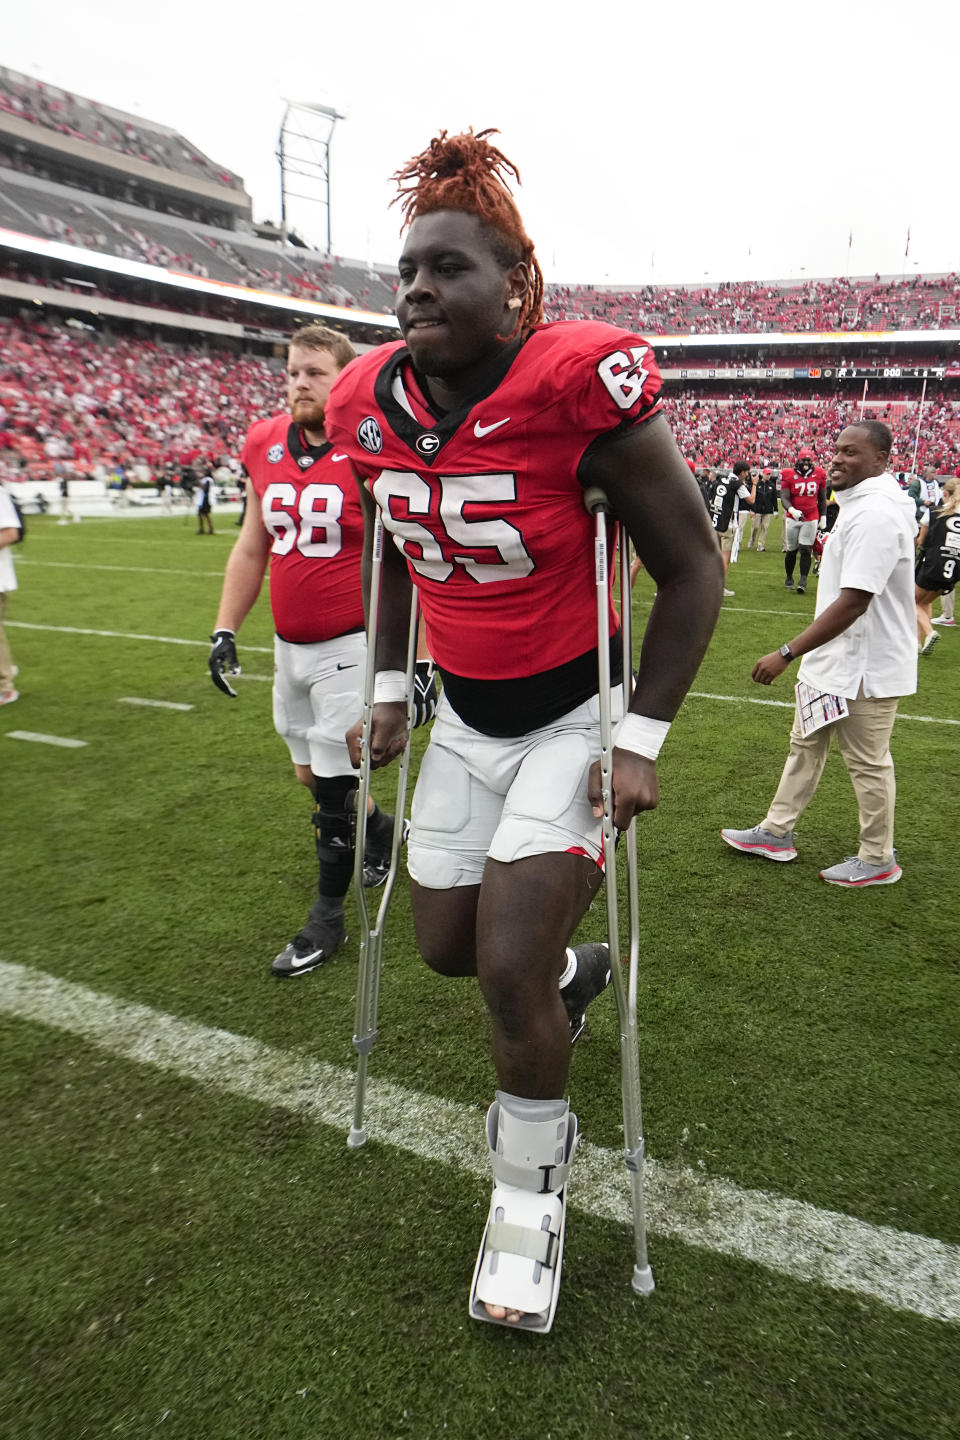 Georgia offensive lineman Amarius Mims uses crutches to leave the field after defeasting South Carolina an NCAA college football game Saturday, Sept. 16, 2023, Ga. Mims wa injured in the firt half. (AP Photo/John Bazemore)